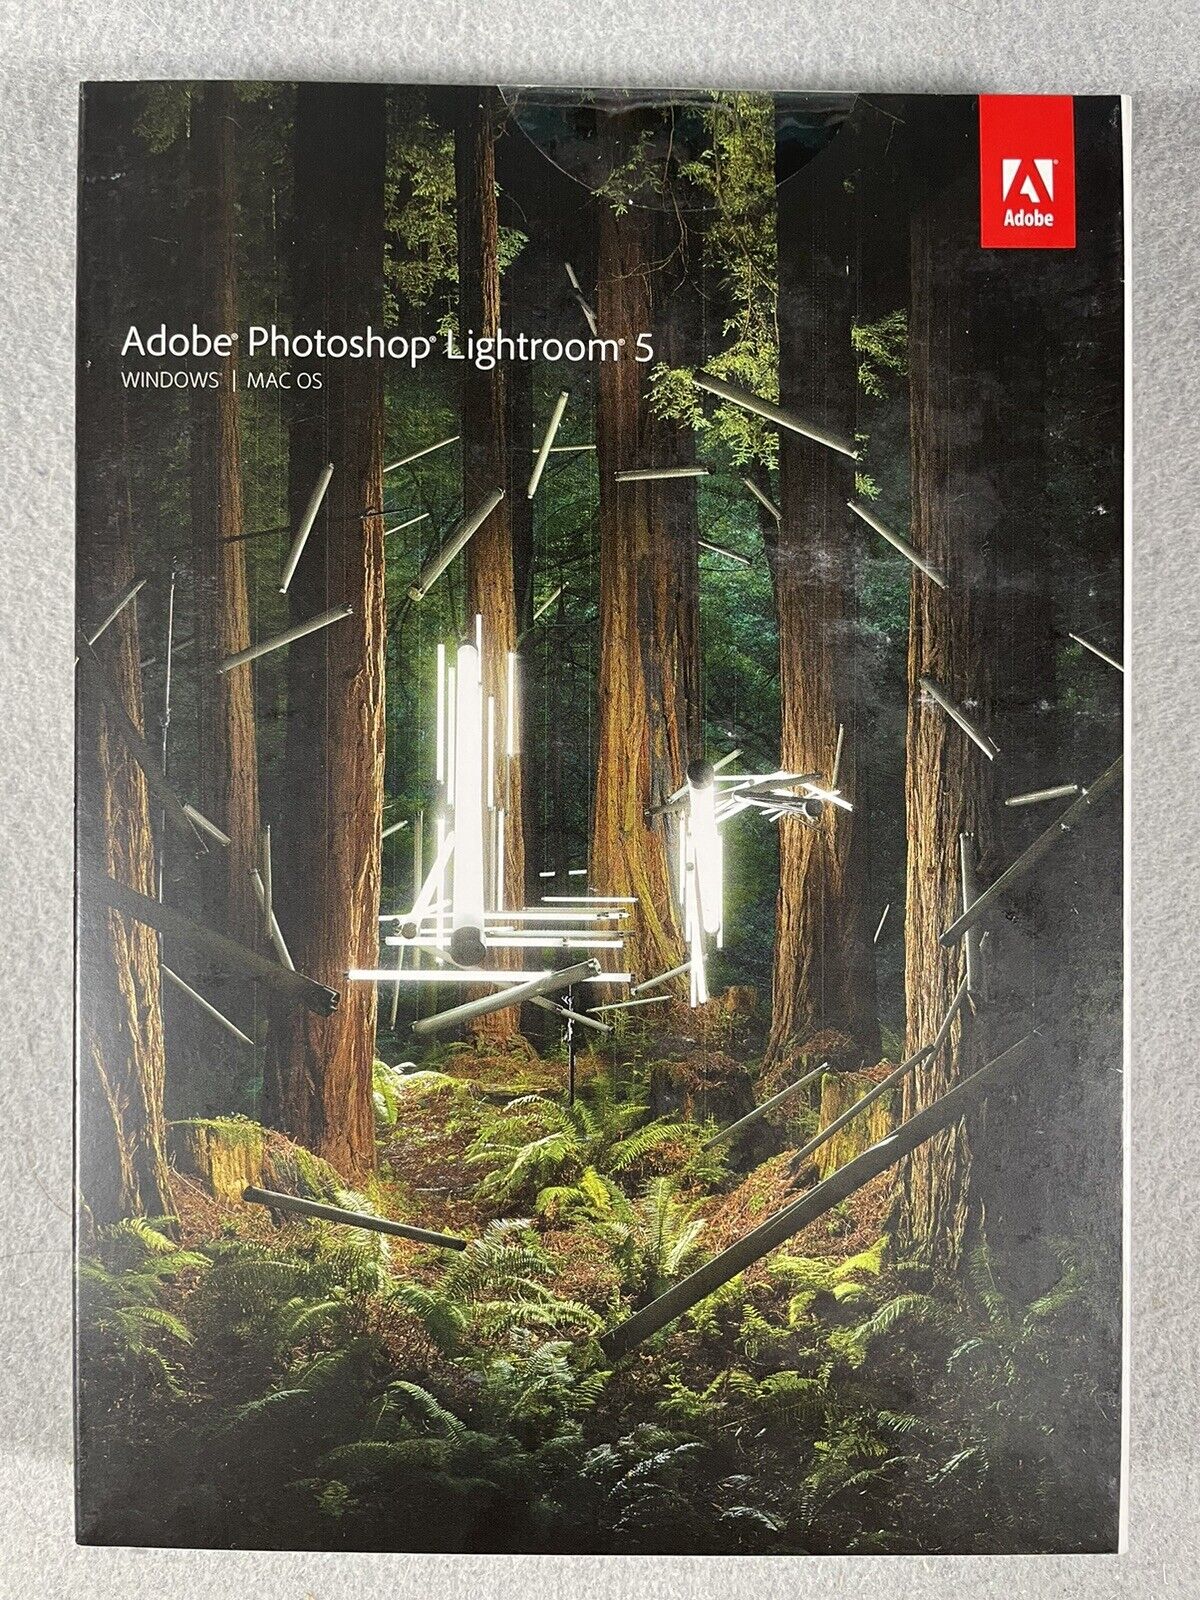 NEW Adobe Photoshop Lightroom 5 for Mac OS and Windows Full Retail Version